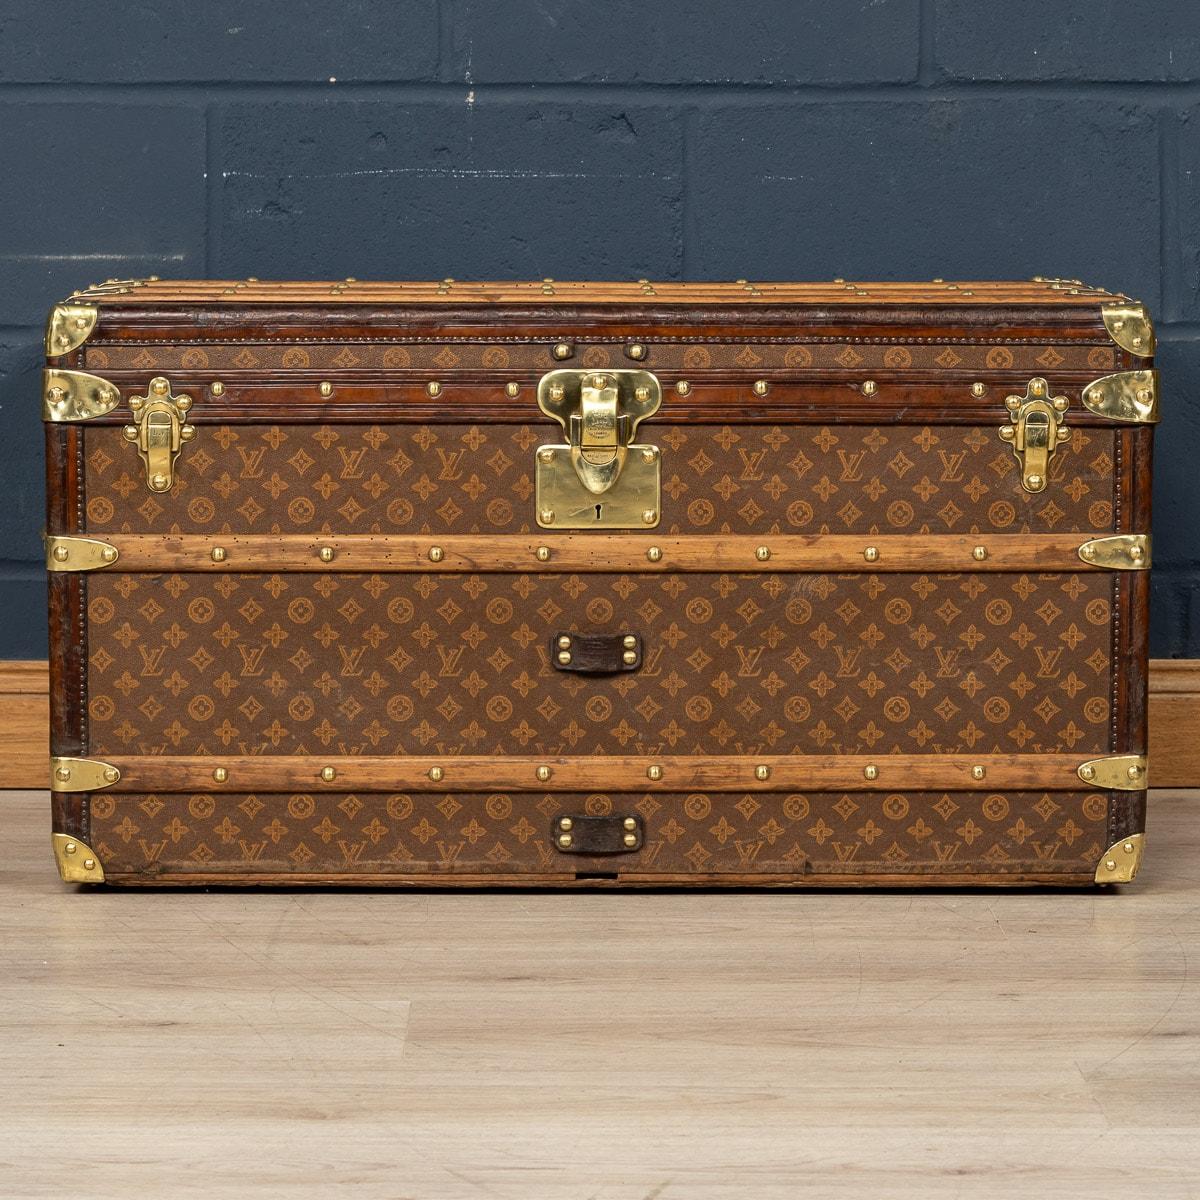 20th Century Louis Vuitton Trunk In Monogram Canvas, France, c.1900 In Good Condition For Sale In Royal Tunbridge Wells, Kent